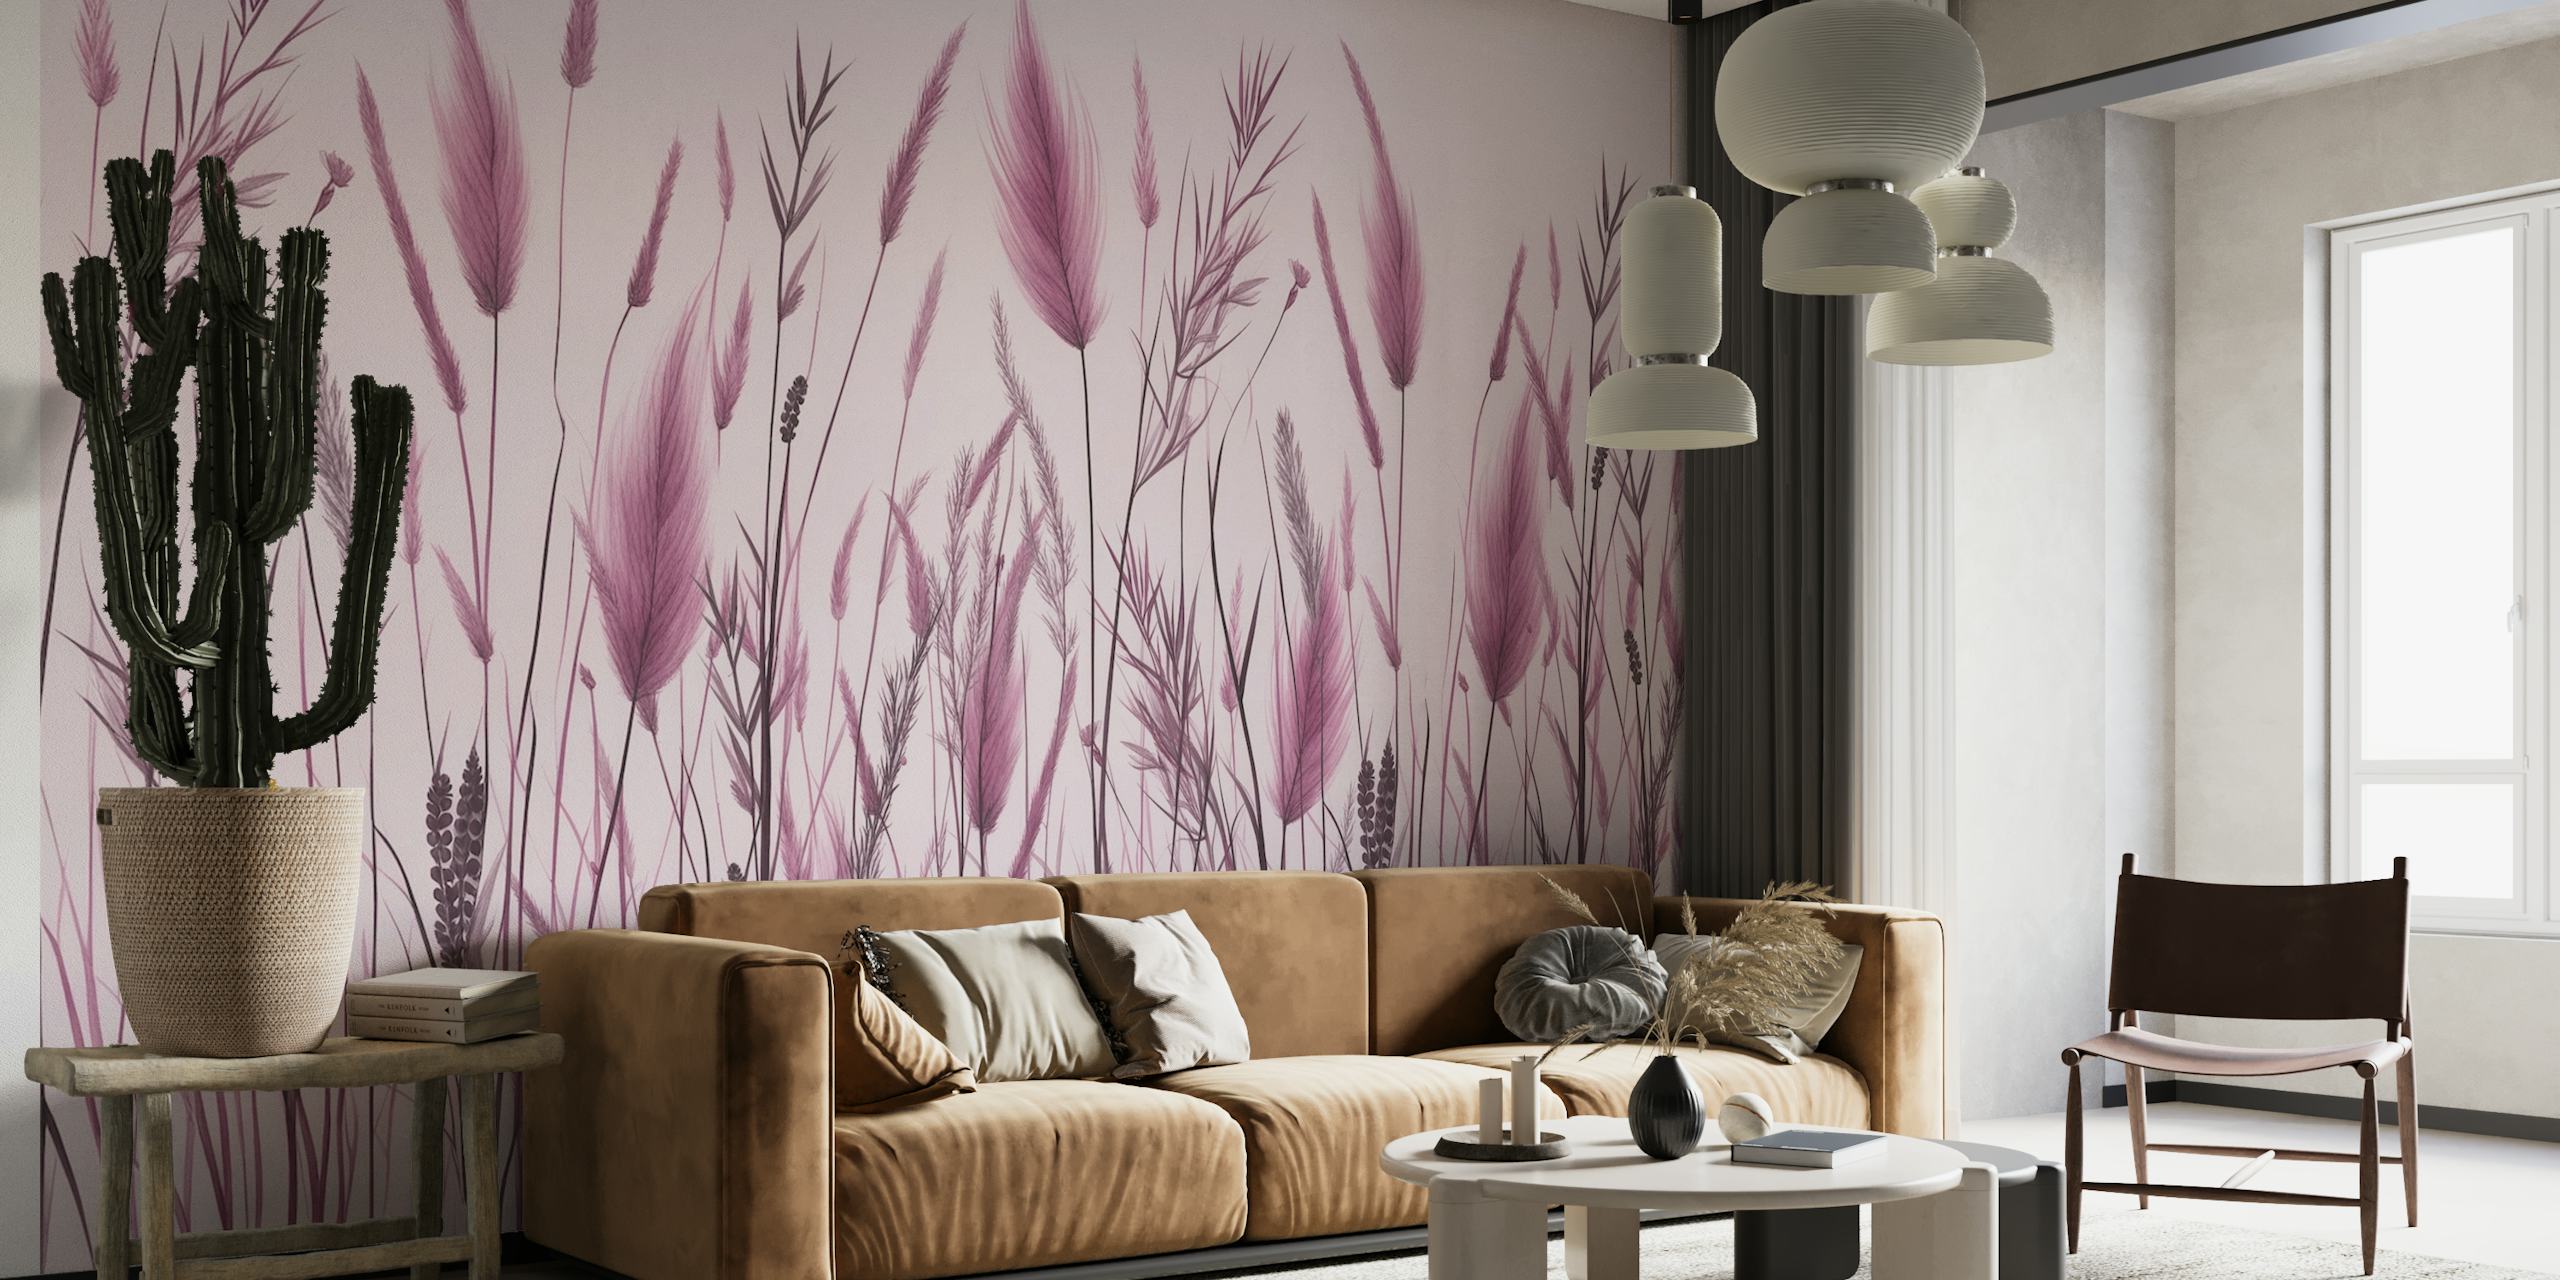 Monochromatic pink and gray wild grass botanical wall mural